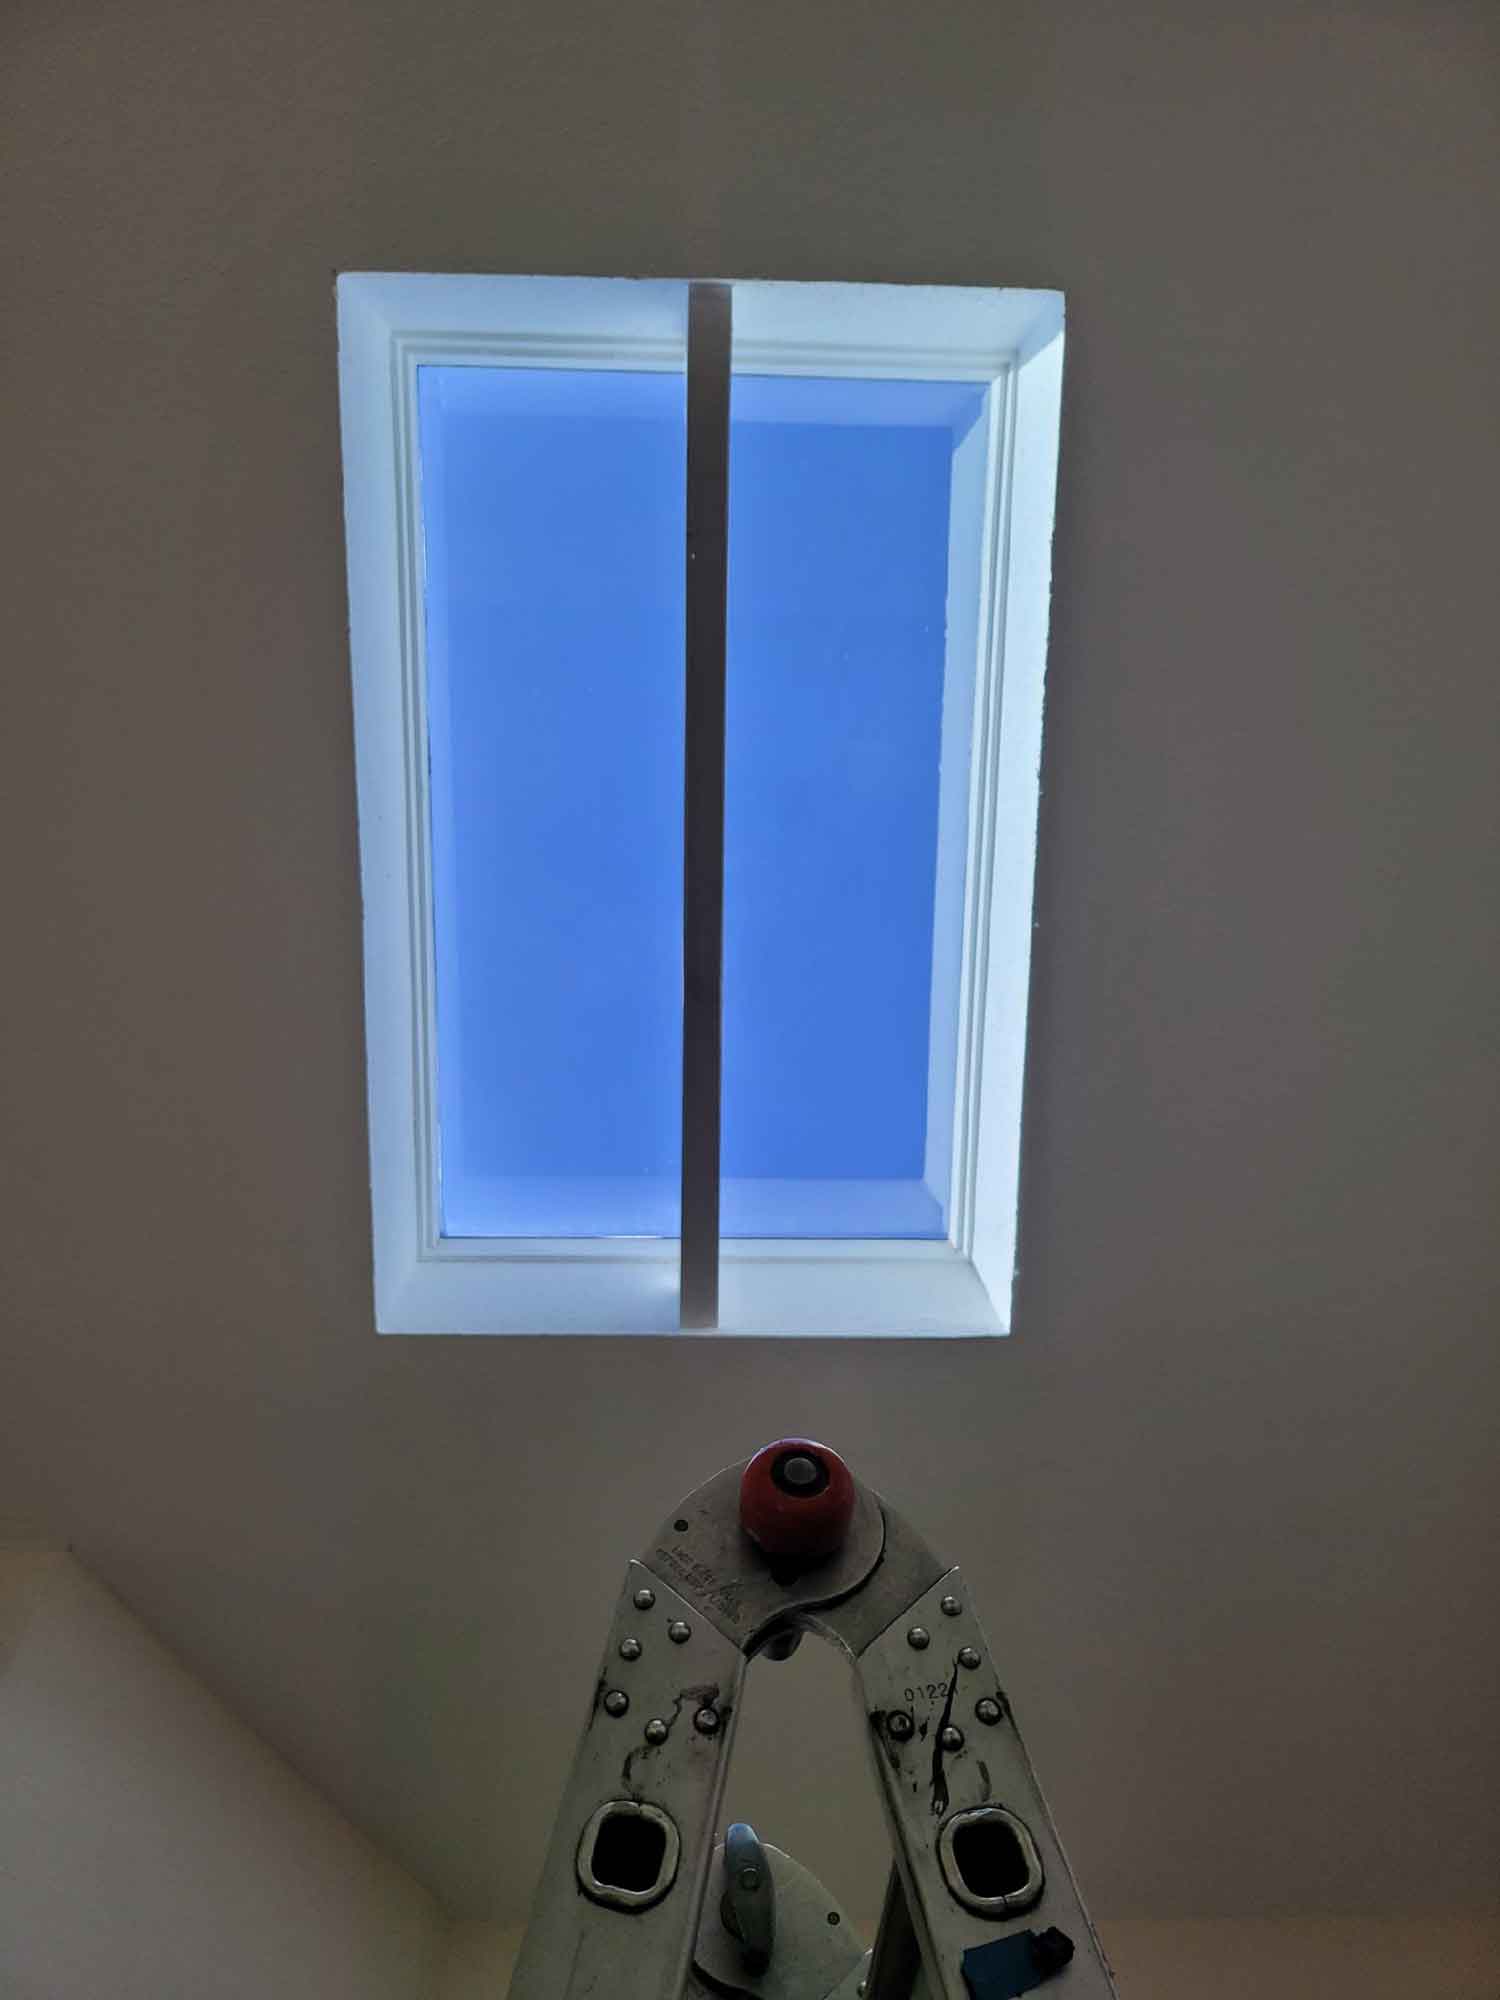 The ClimatePro team installed two window tints on the skylights of this San Carlos, CA, home. Get a free estimate for your home today.